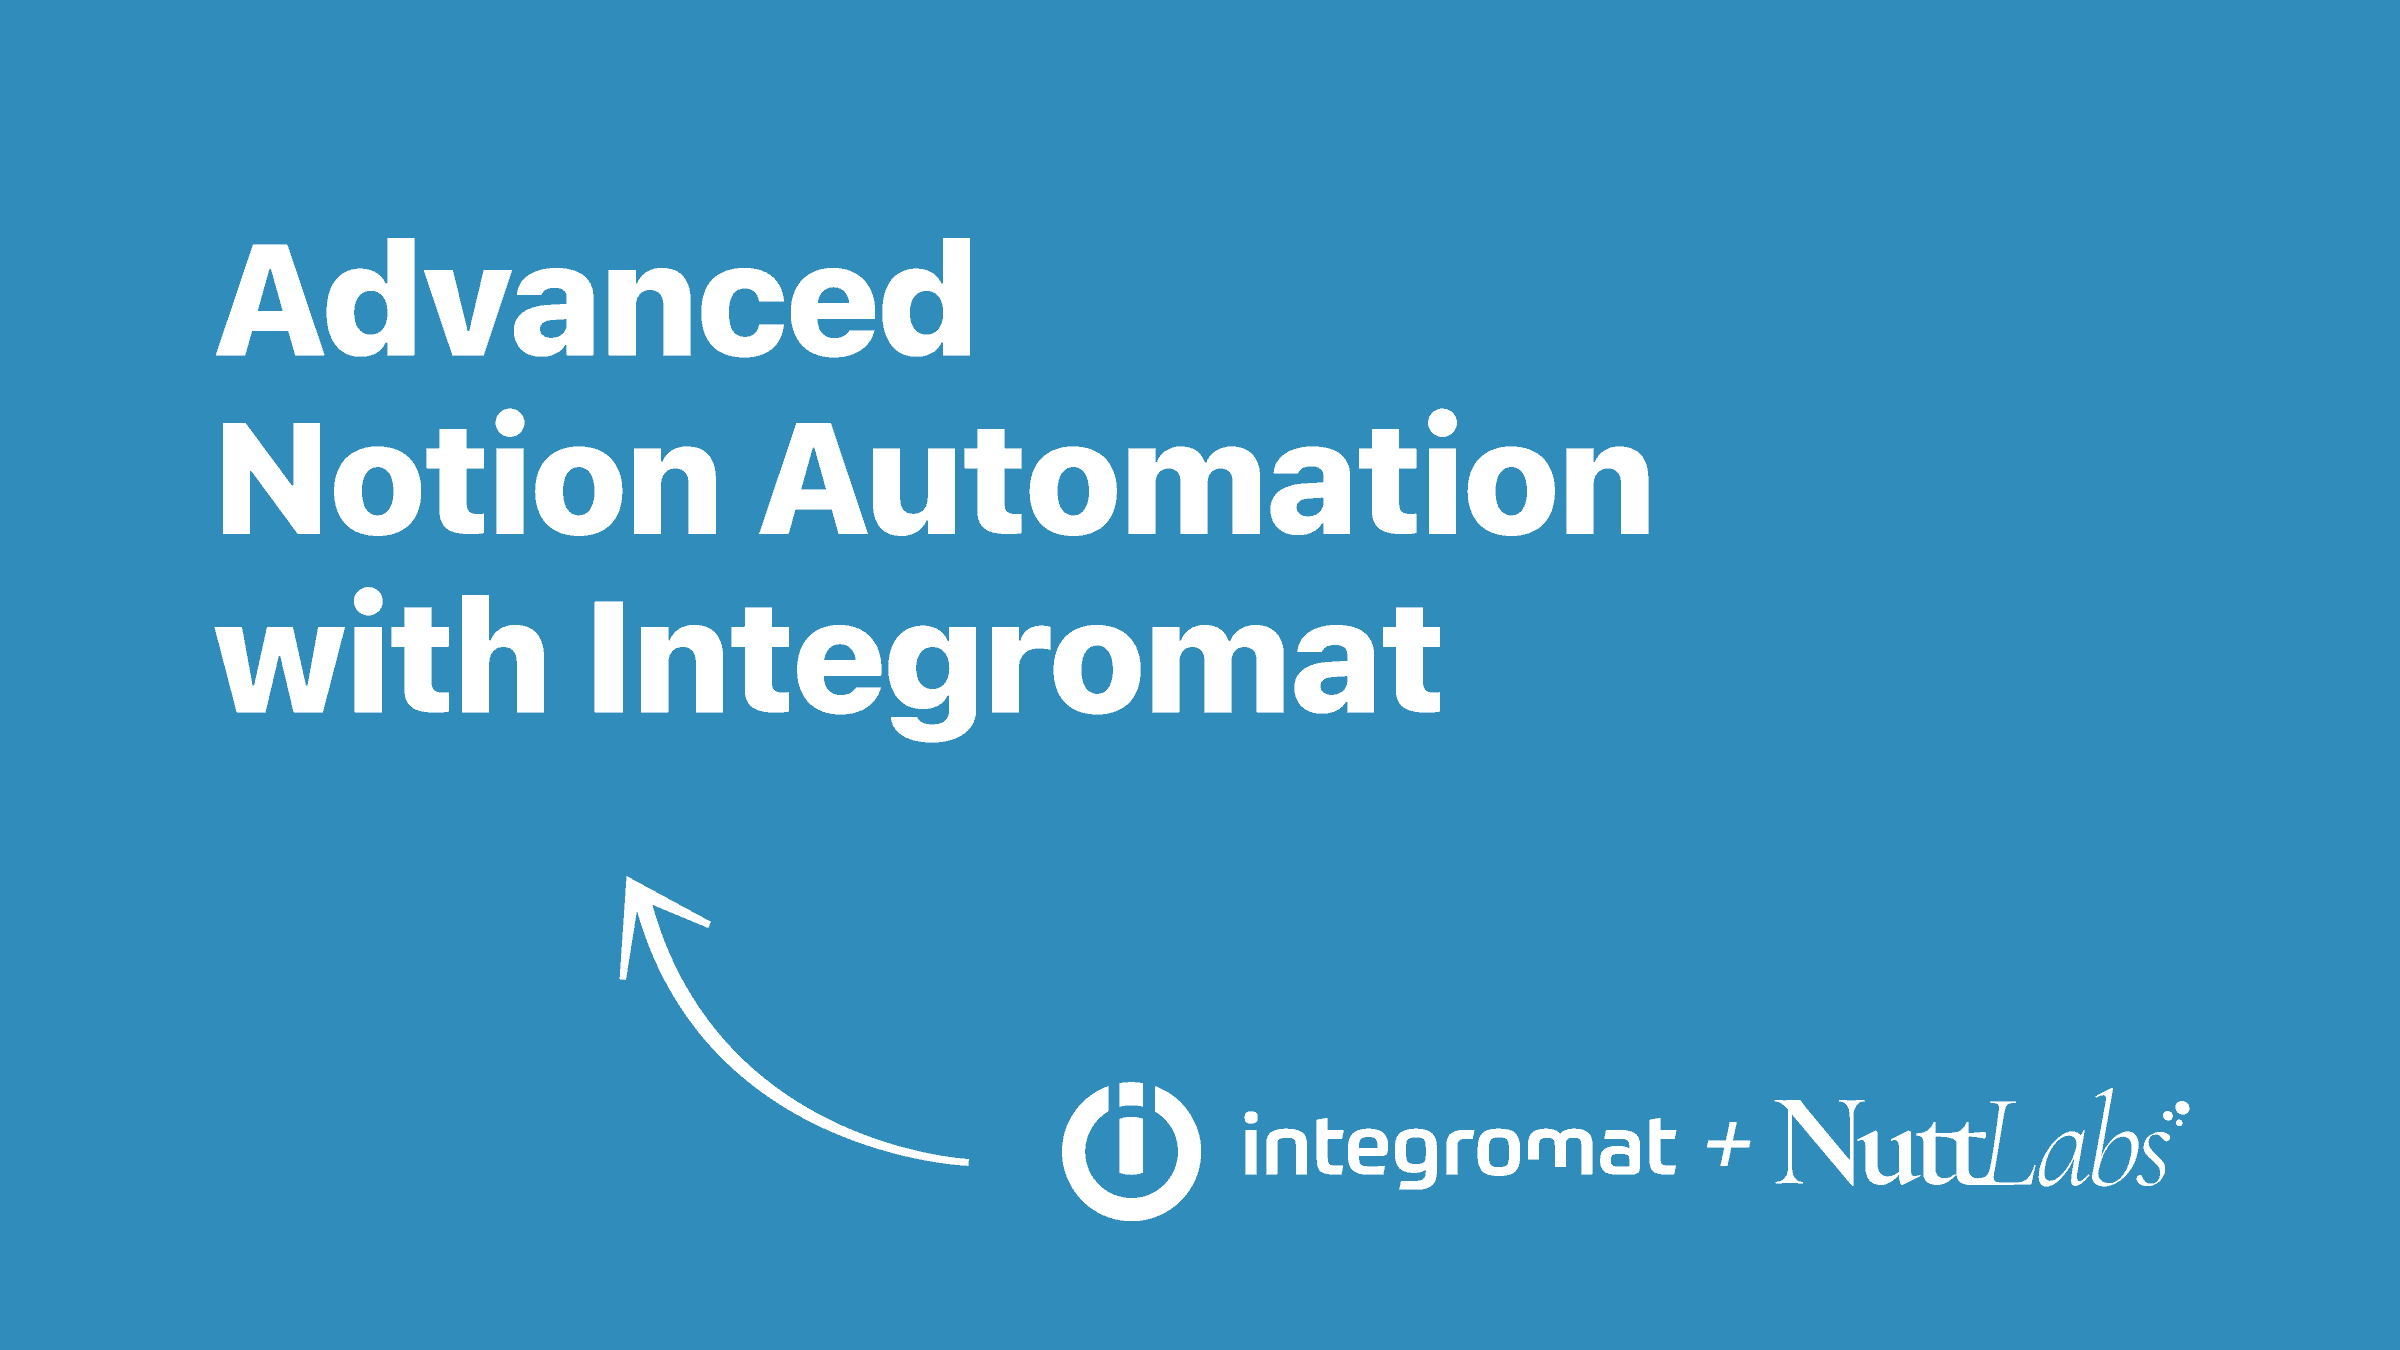 Advanced Notion Automation with Integromat